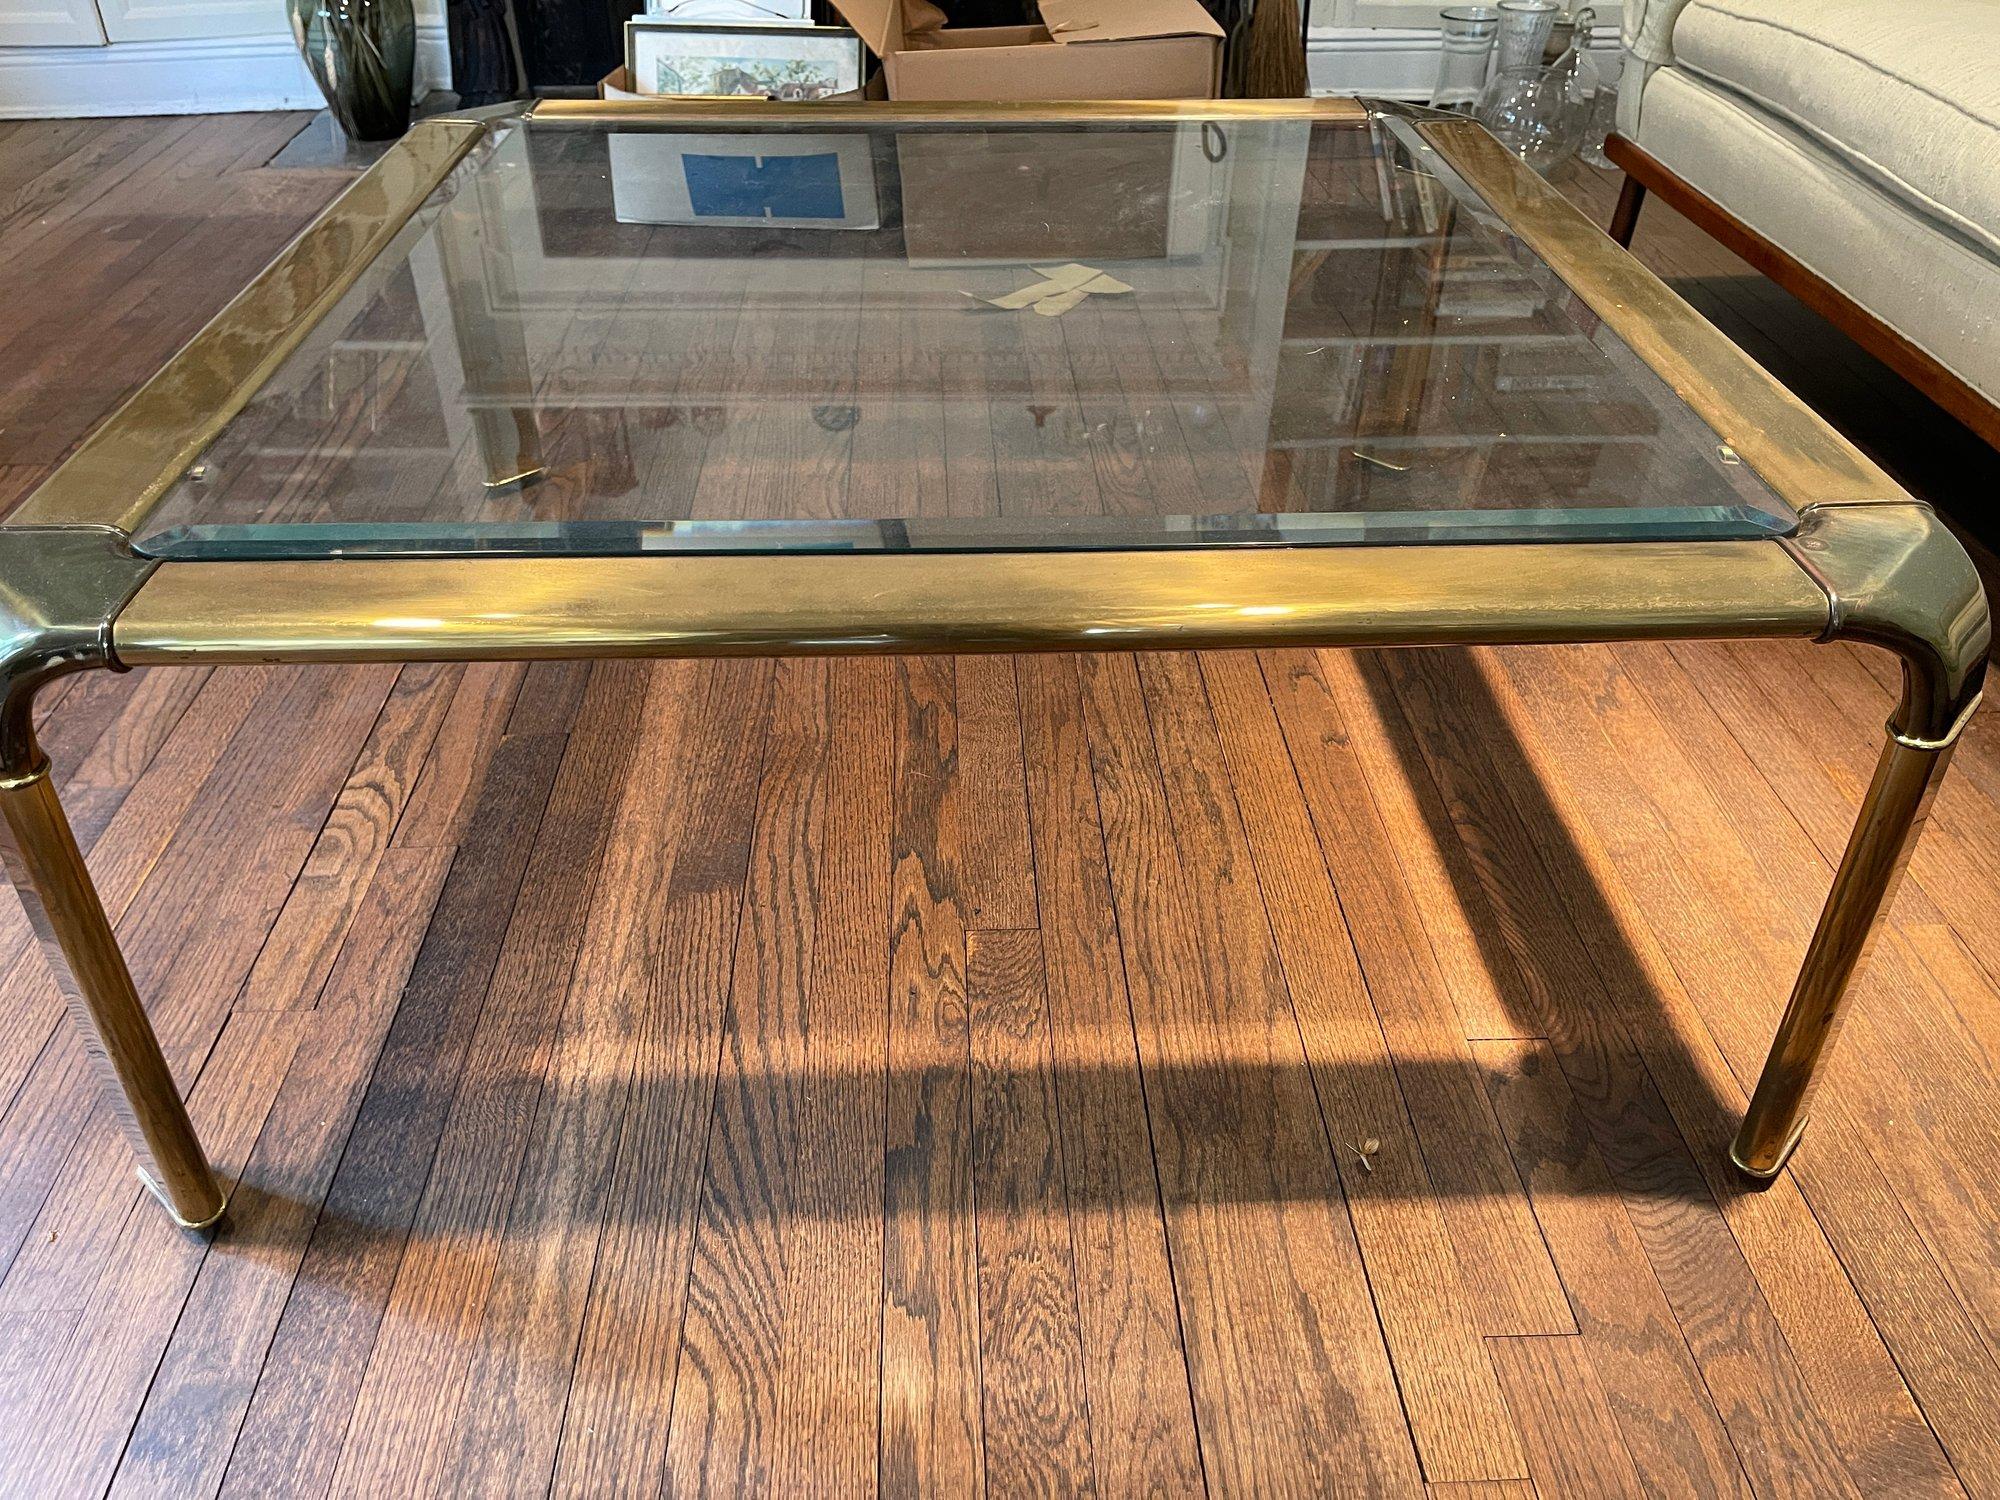 Wonderful John Widdicomb square brass coffee table. We love the sleek modern design with the beveled glass top. This piece measures 17.25” t x 40” w x 40” d. 